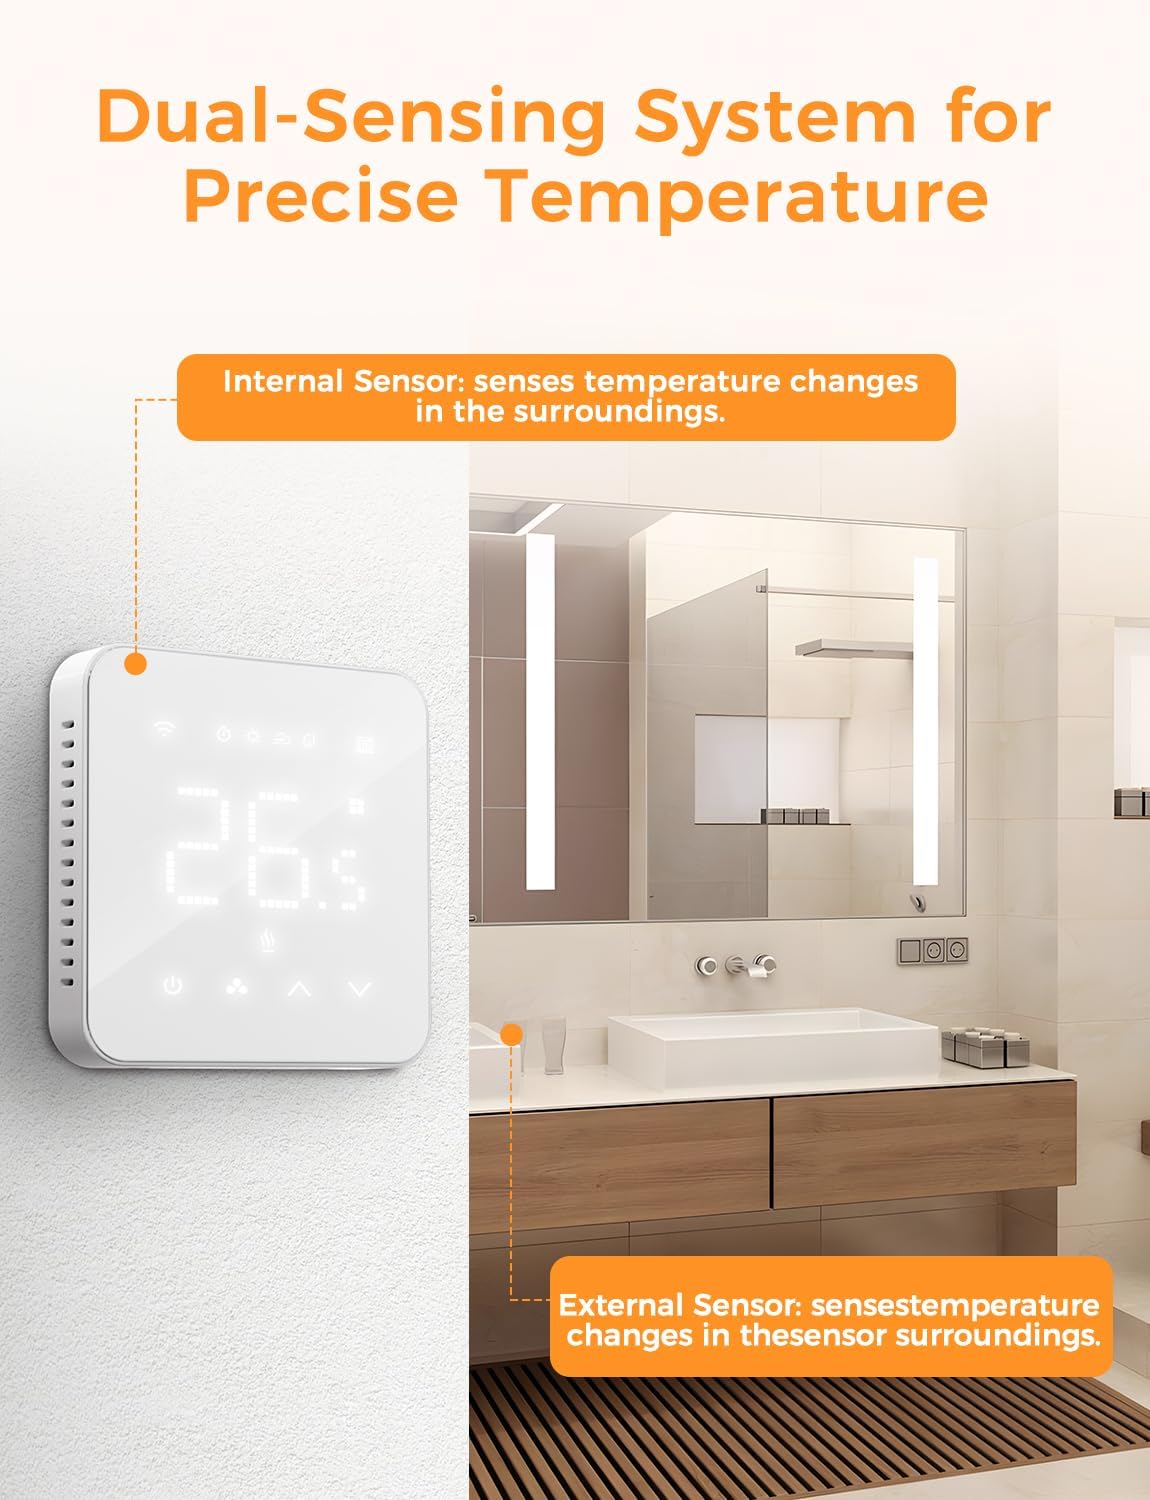 Smart Thermostat for Combi Boiler/Water Underfloor Heating, WiFi Thermostat Works with Apple HomeKit Siri, Alexa, Google Home, Support Programmer No Hub Required - White - Pack of 1 - 240 V - Amazing Gadgets Outlet